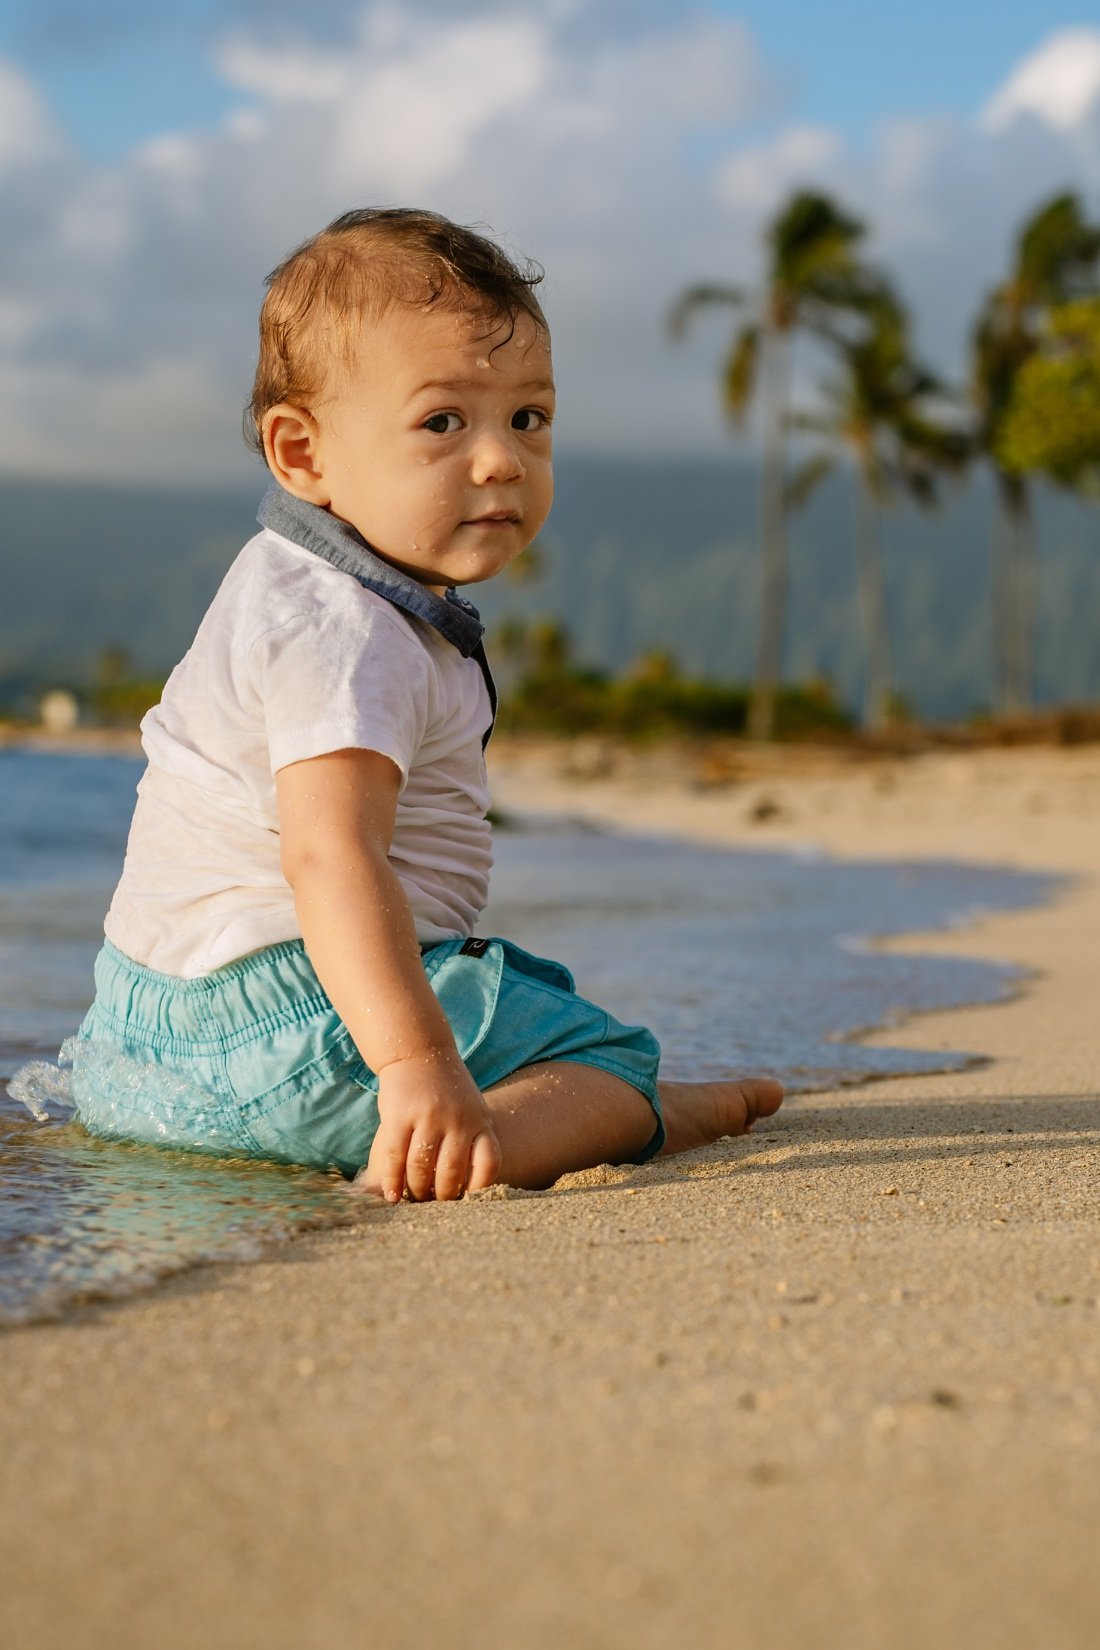 baby after getting splashed by water at the beach in hawaii